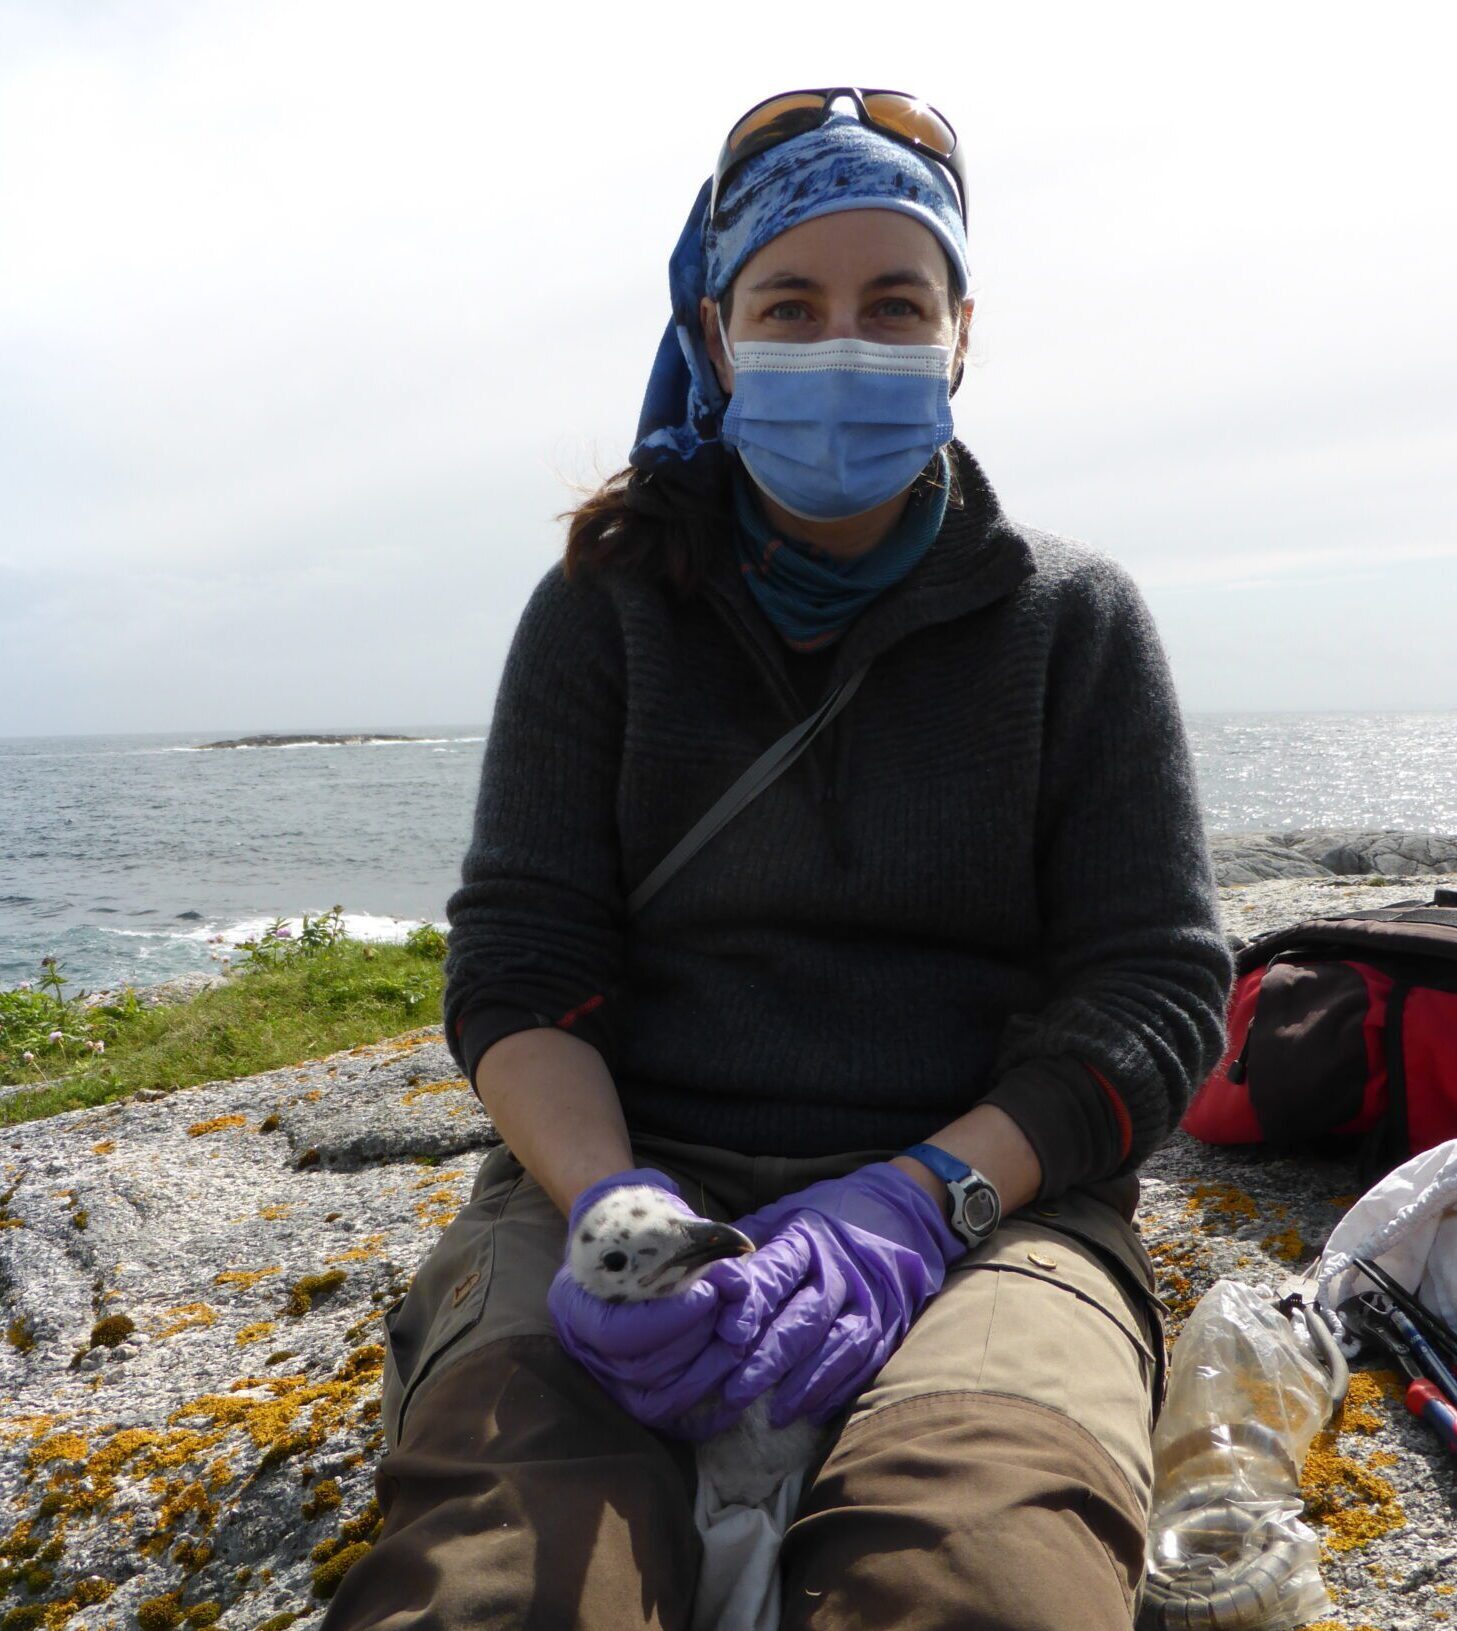 Fieldworker with gull and protective equipment. Photo © SEAPOP